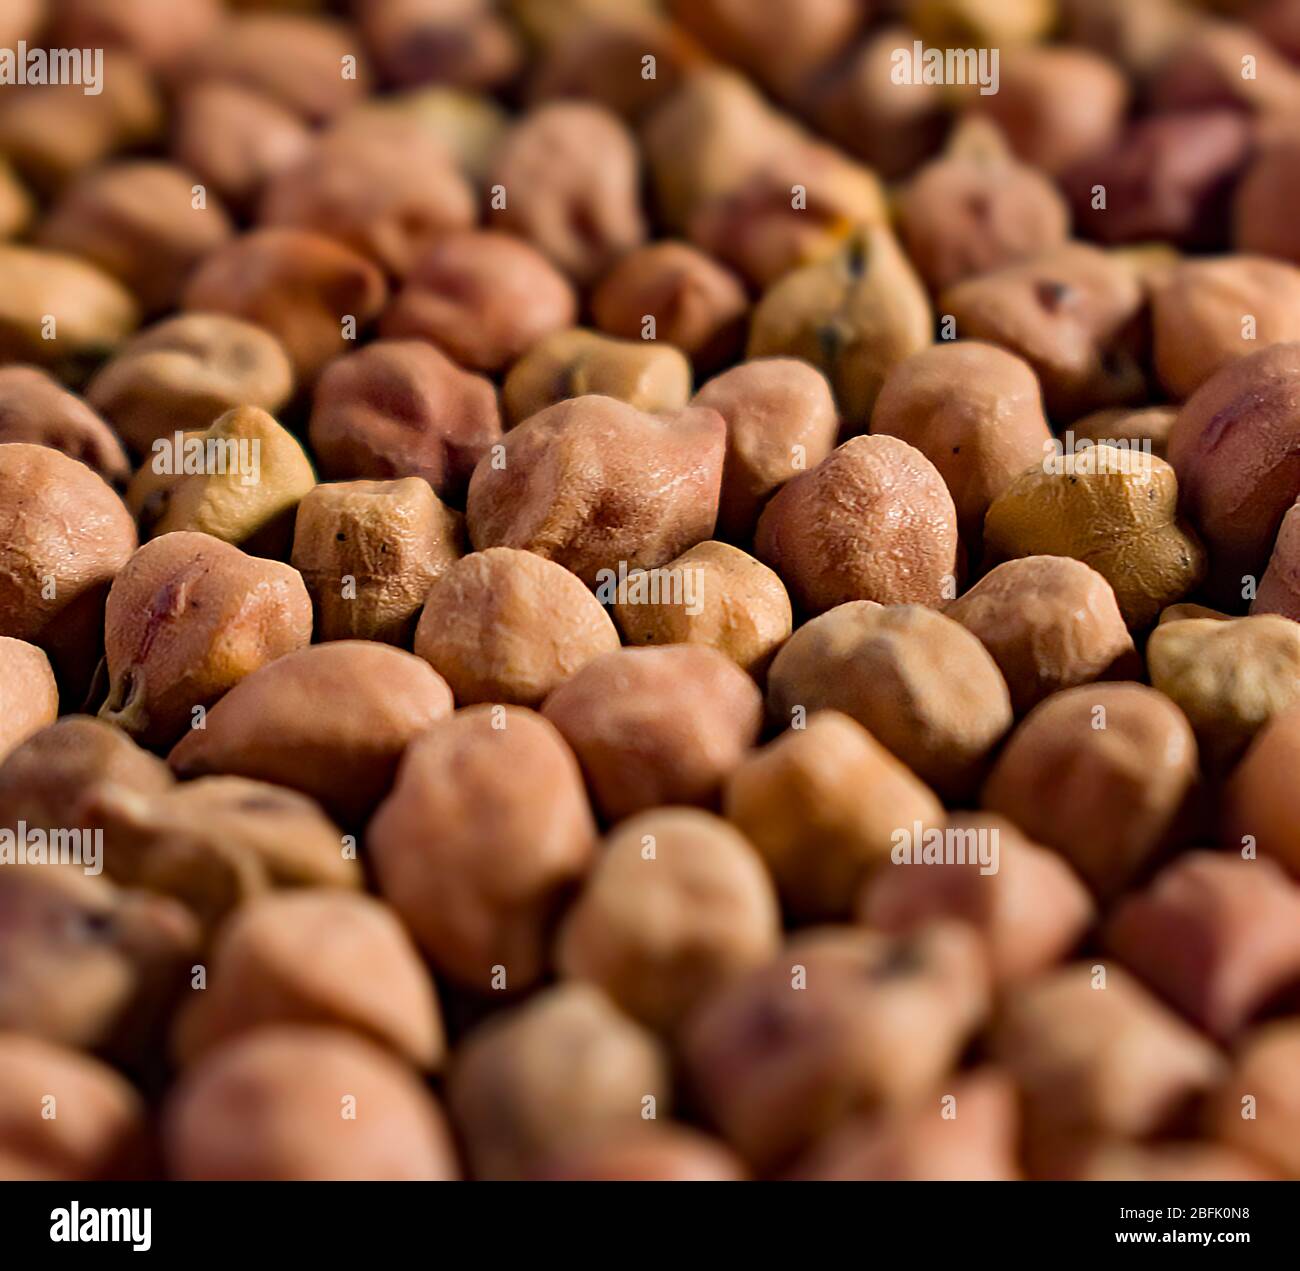 The chickpea or chick pea (Cicer arietinum) is an annual legume of the family Fabaceae, subfamily Faboideae. Selective focus. Stock Photo